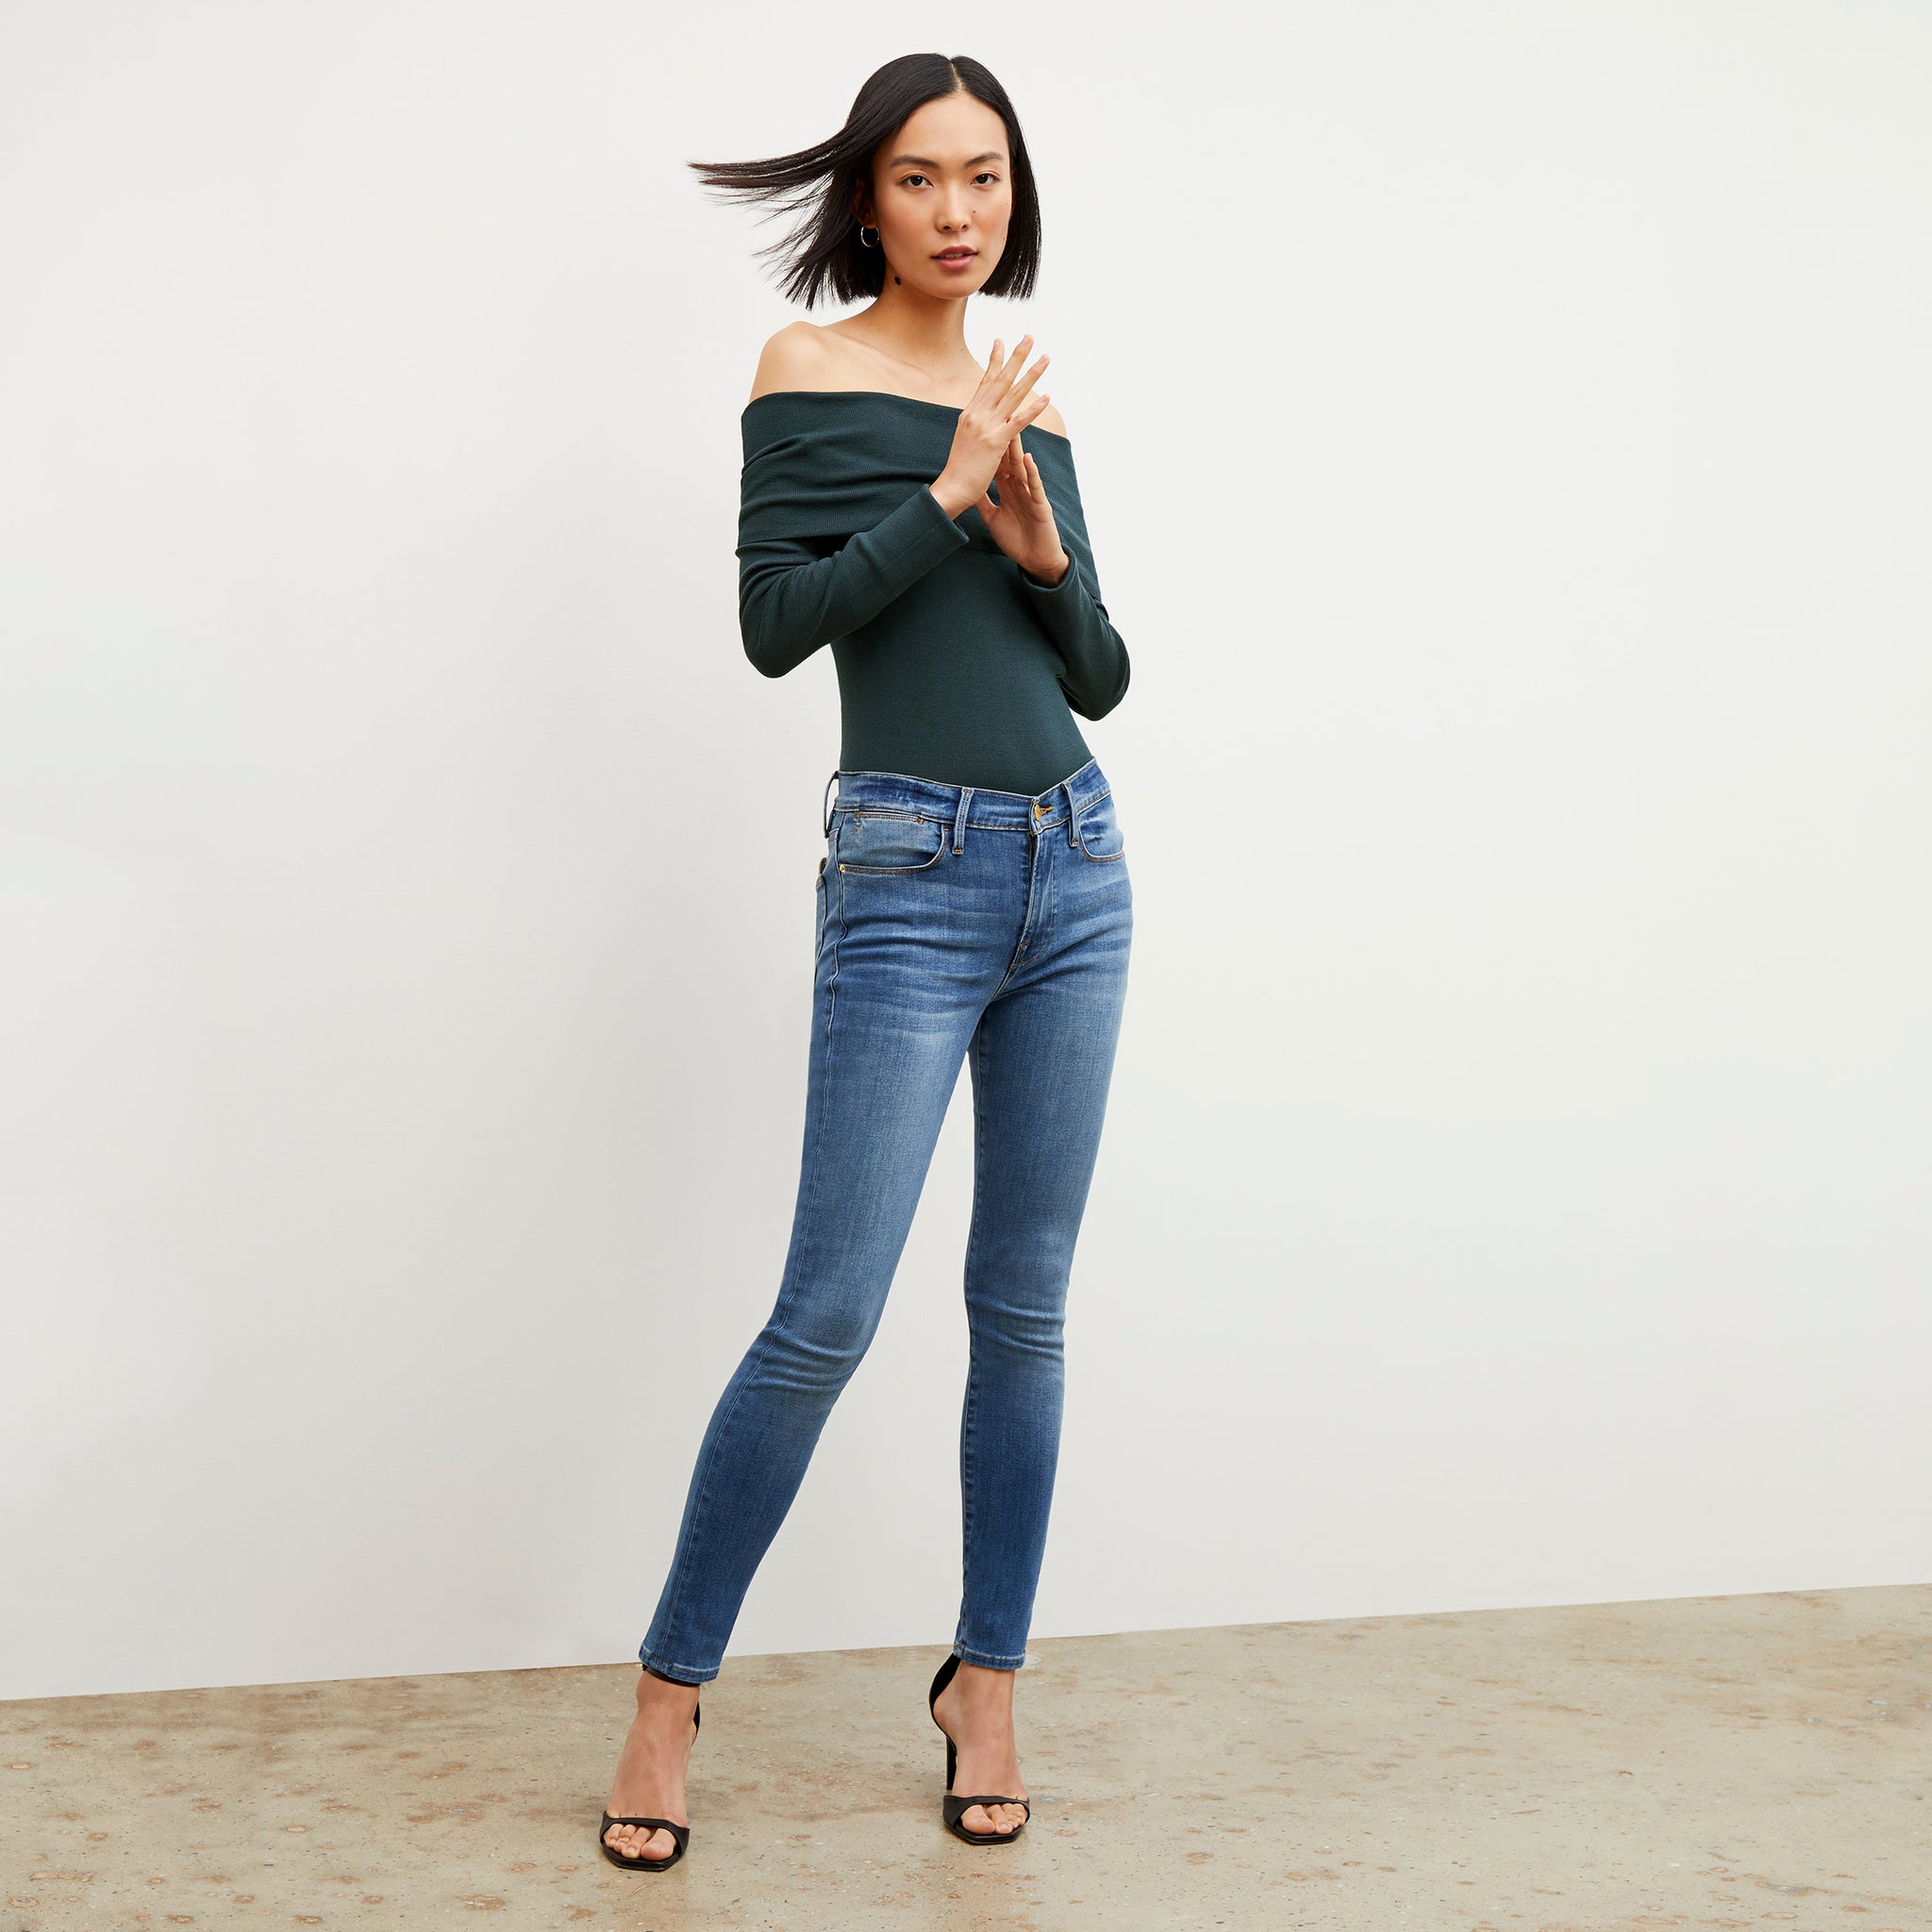 Front image of a woman wearing the FRAME Denim Le High Skinny Jean in Poe